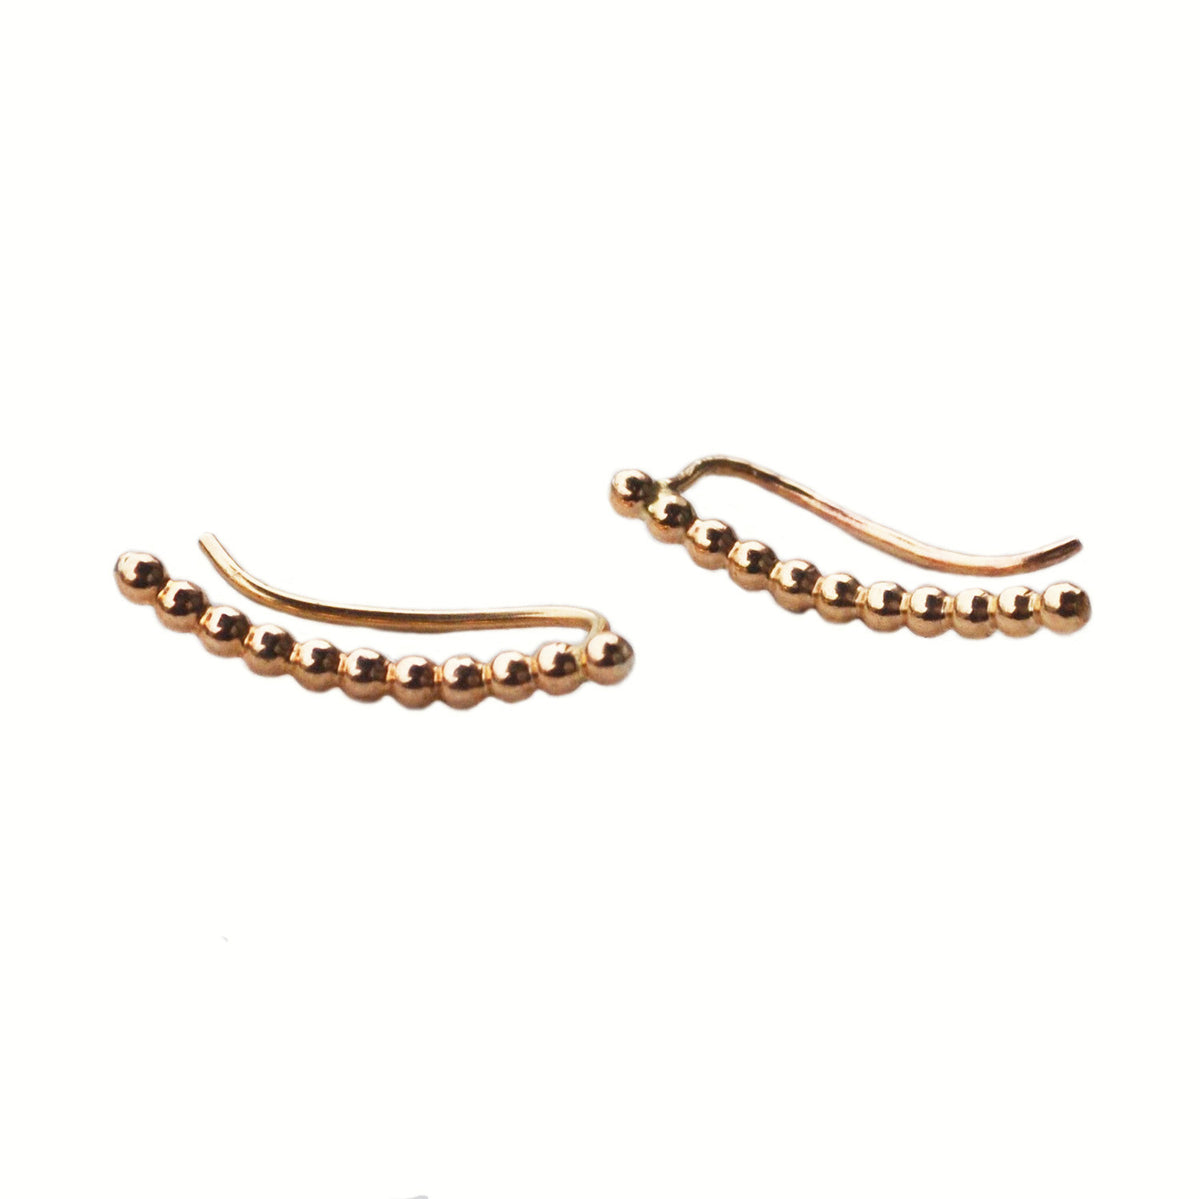 Mini Beaded Ear Climbers, Gold, Rose Gold, or Silver